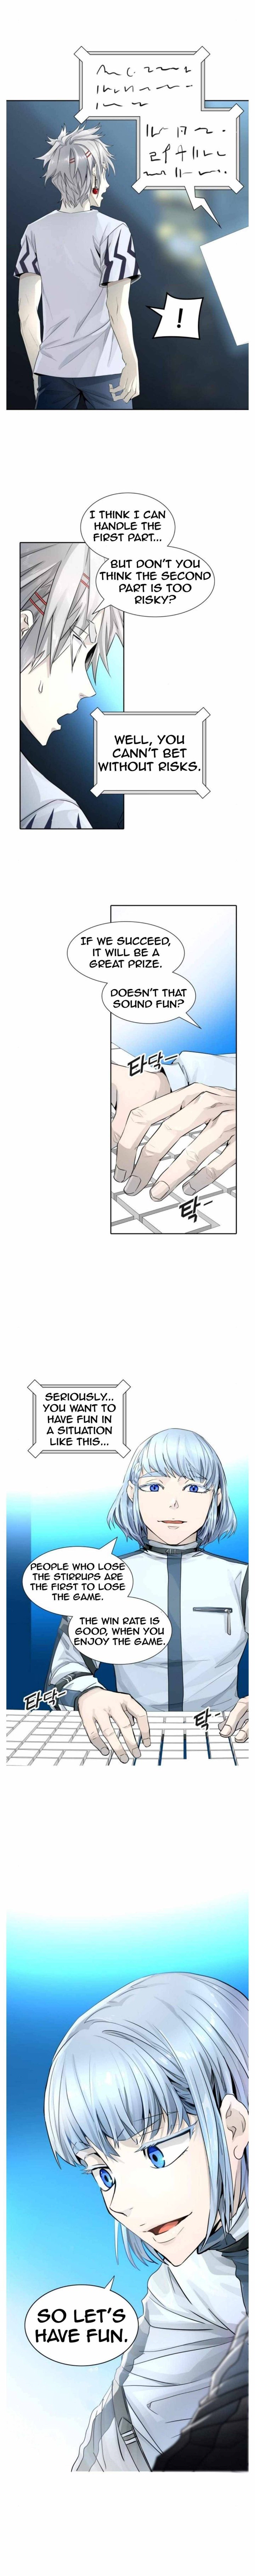 Tower Of God Chapter 501 Page 3